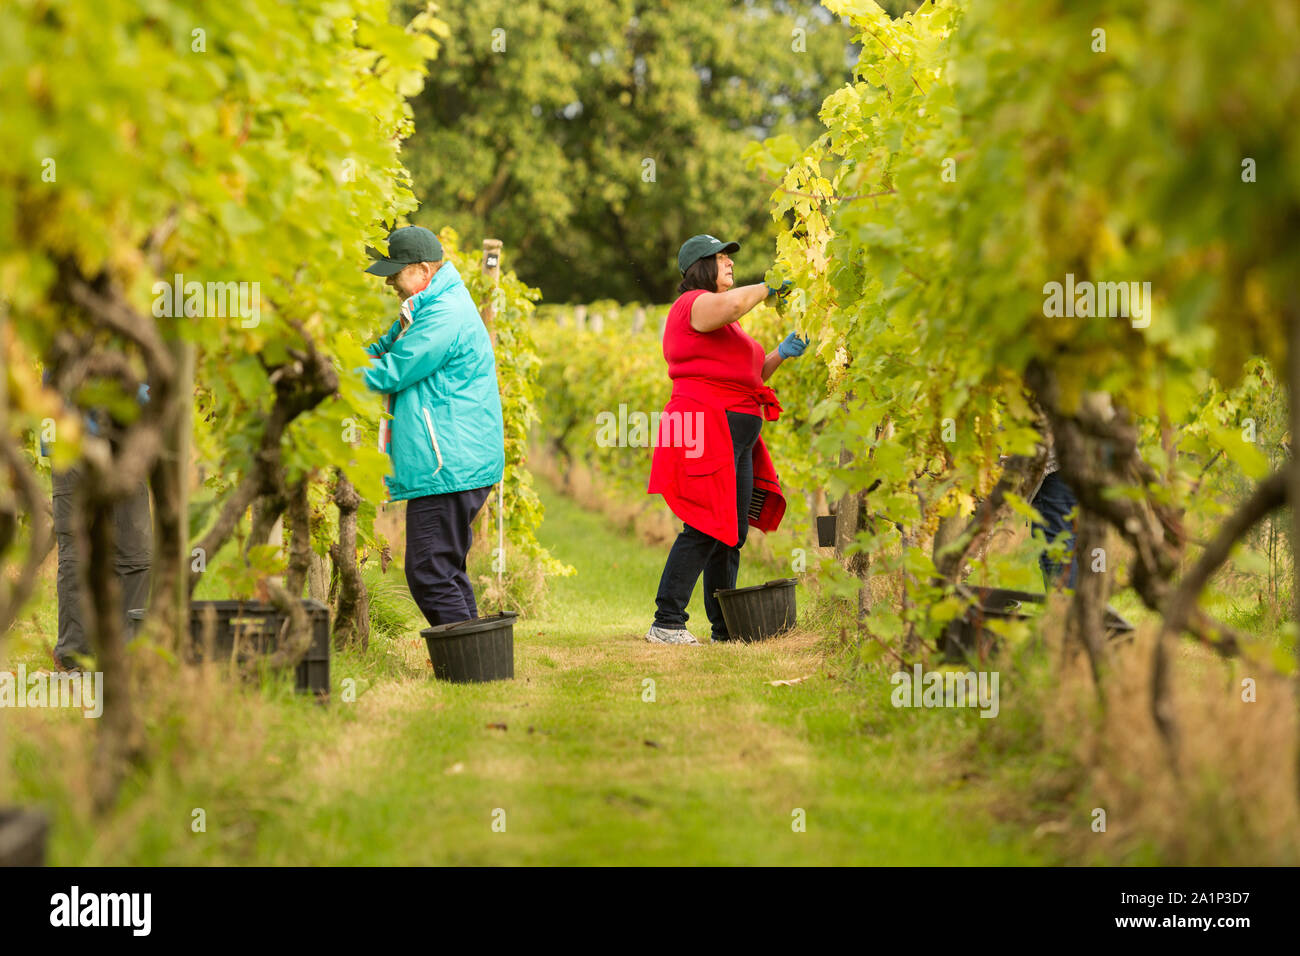 Astley, Worcestershire, UK. 28th September 2019. Volunteers begin the annual grape harvest at Astley Vineyard near Stourport-on-Severn, Worcestershire. One of Britain's oldest and most northerly vineyards, the family-run Astley Vineyard was established in 1971 and is a single estate. Its estate bottling plant is expected to produce around 10,000 bottles. The volunteers are currently picking the Madeleine Angevine - an almost UK exclusive grape variety. Peter Lopeman/Alamy Live News Stock Photo